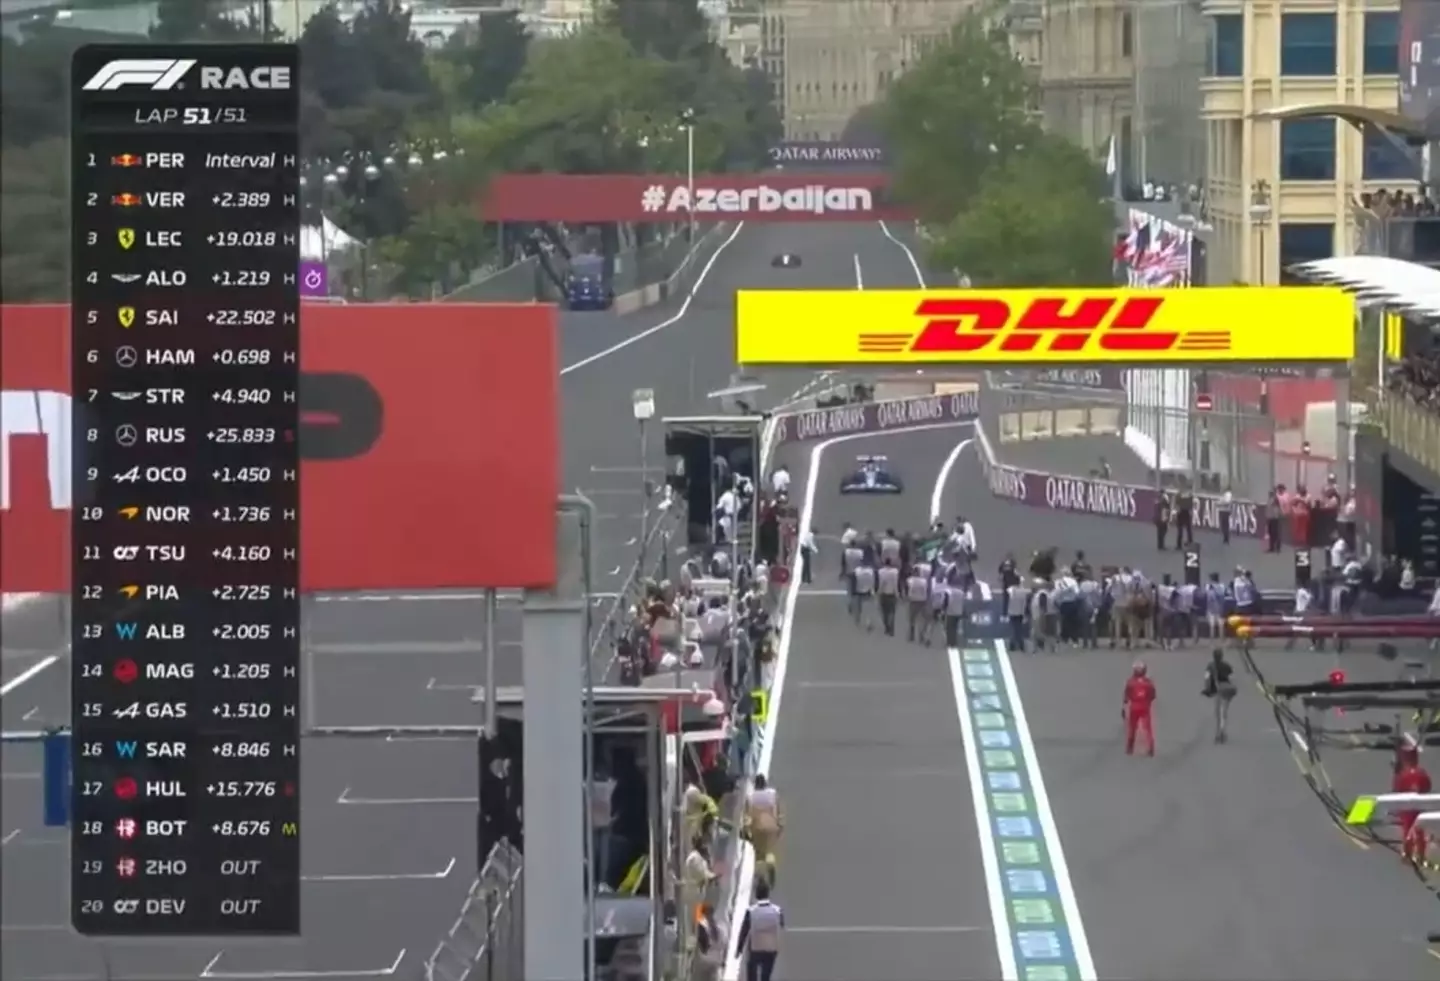 The terrifying incident happened during the Grand Prix earlier today.